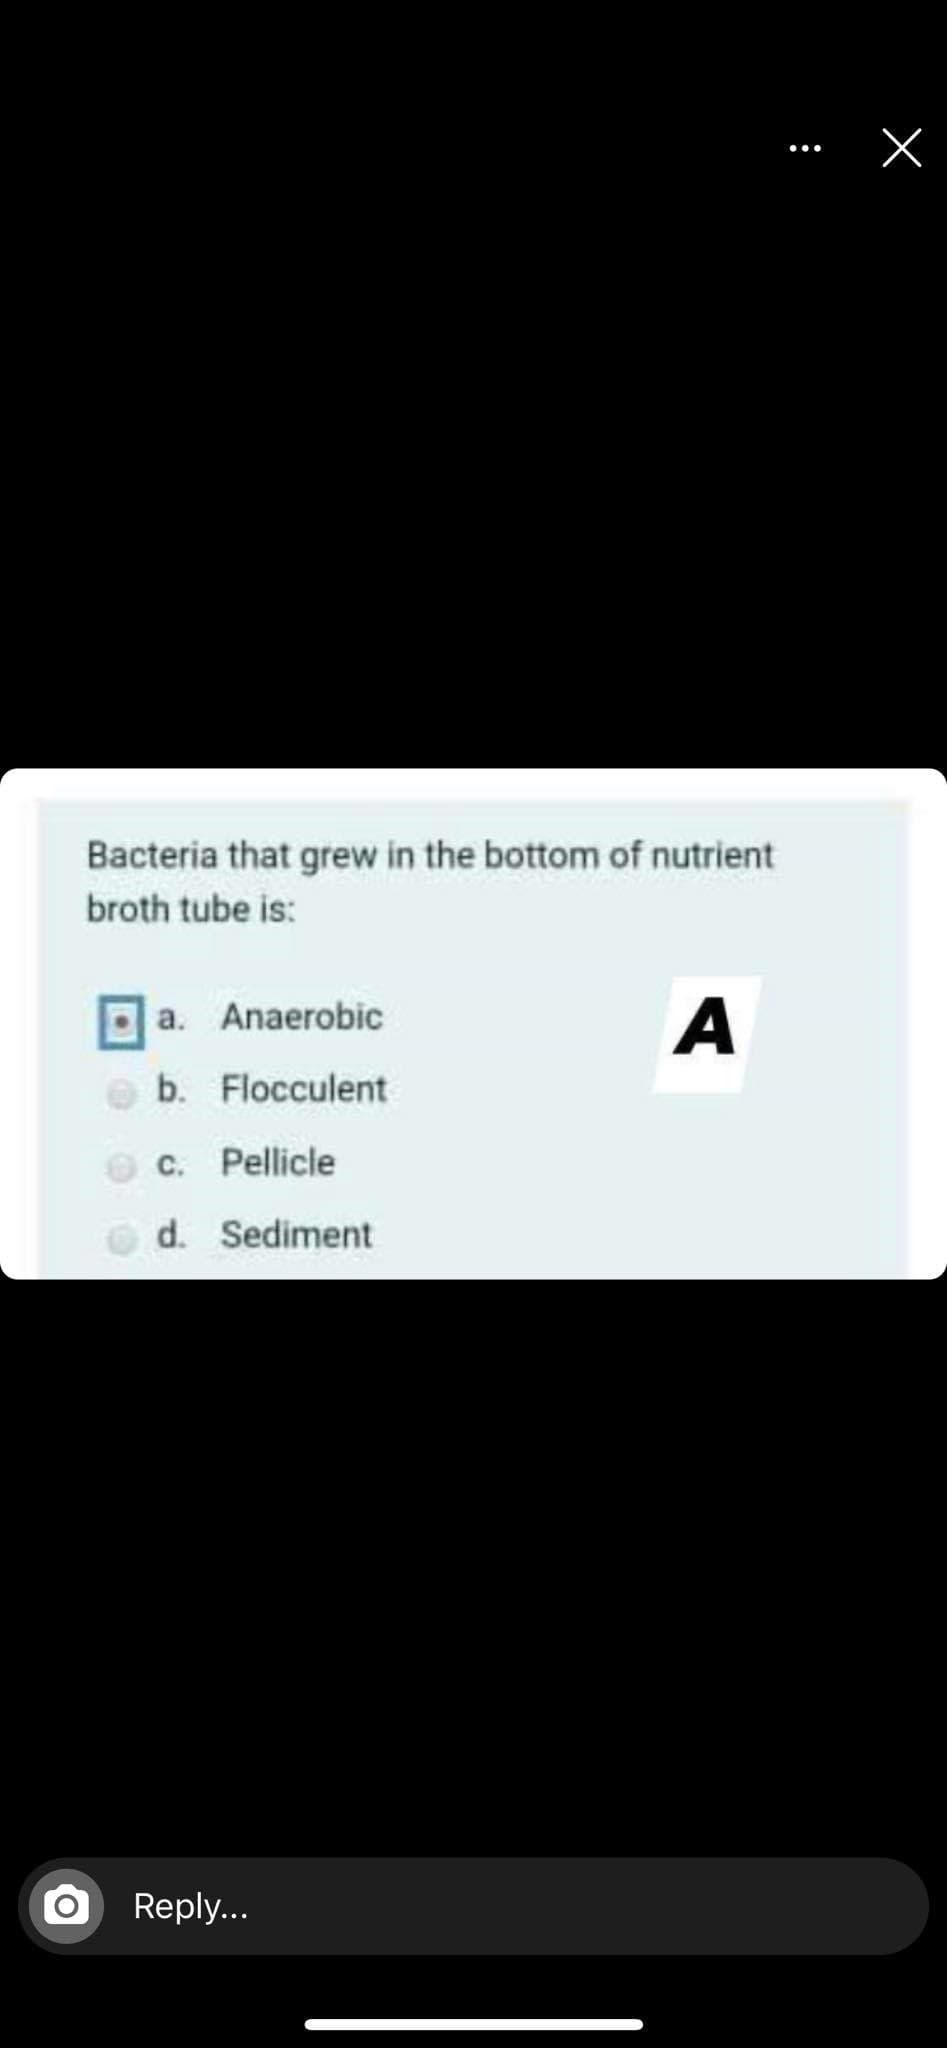 ...
Bacteria that grew in the bottom of nutrient
broth tube is:
a. Anaerobic
A
b. Flocculent
c. Pellicle
d. Sediment
Reply...
